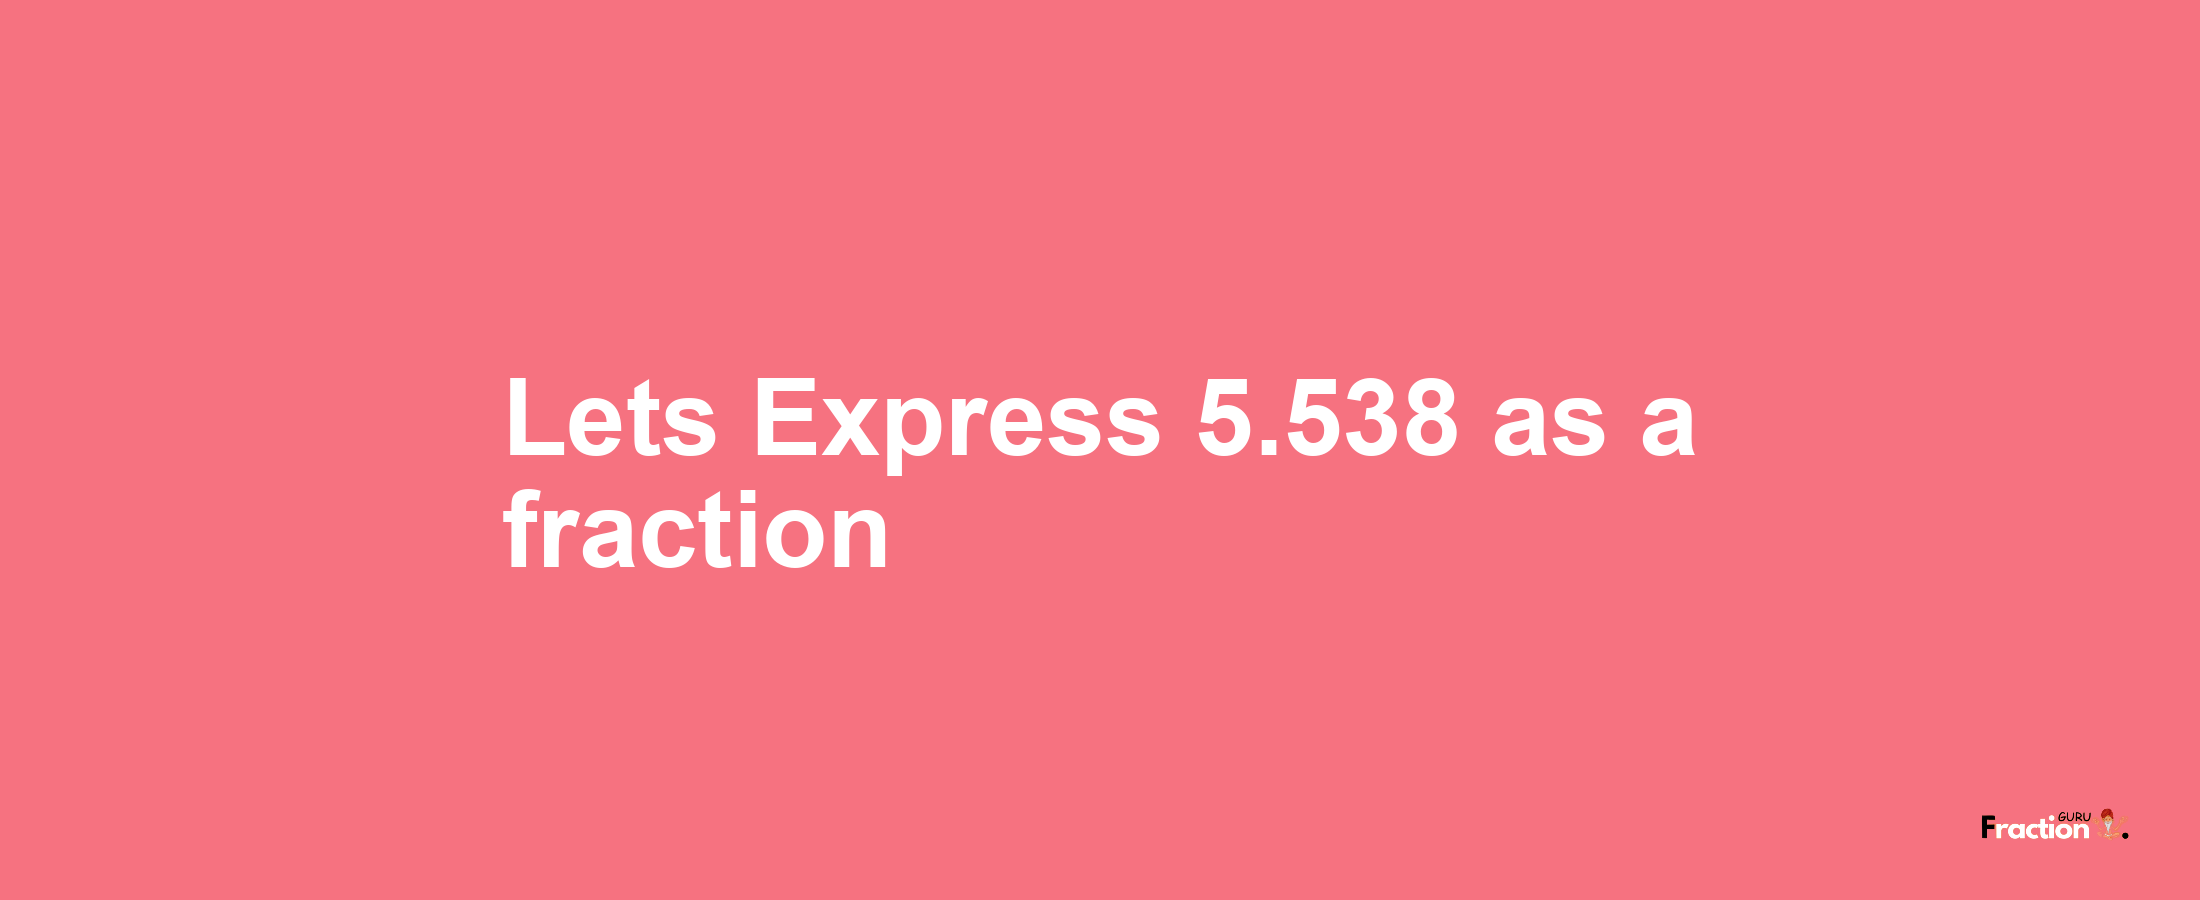 Lets Express 5.538 as afraction